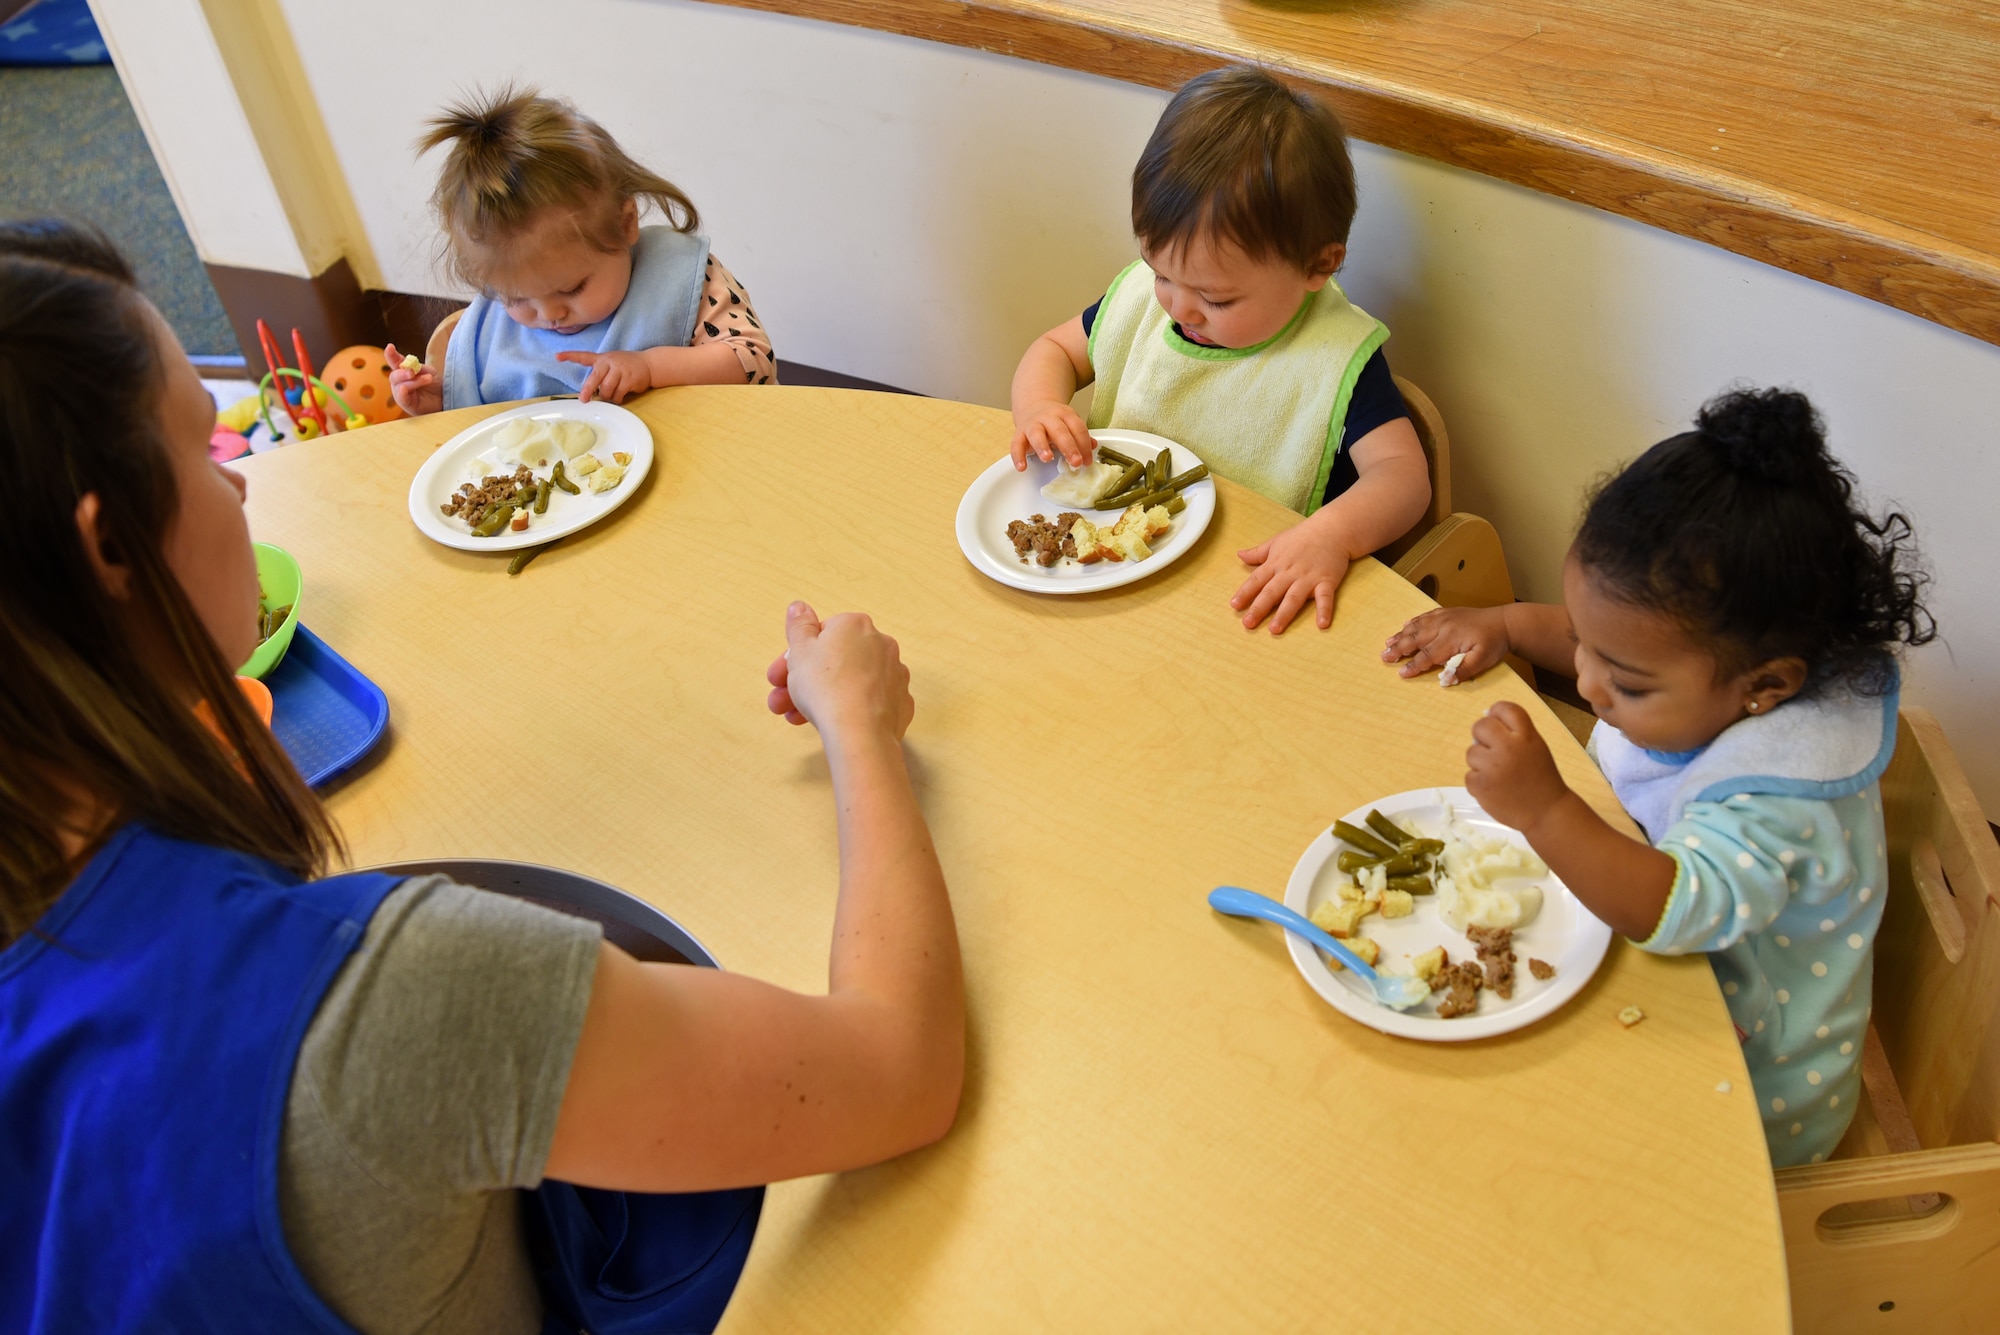 Juliet Yoder, 20th Force Support Squadron Child Development Center caregiver, feeds lunch to the infants in her care at Shaw Air Force Base, S.C., Feb. 25, 2019.